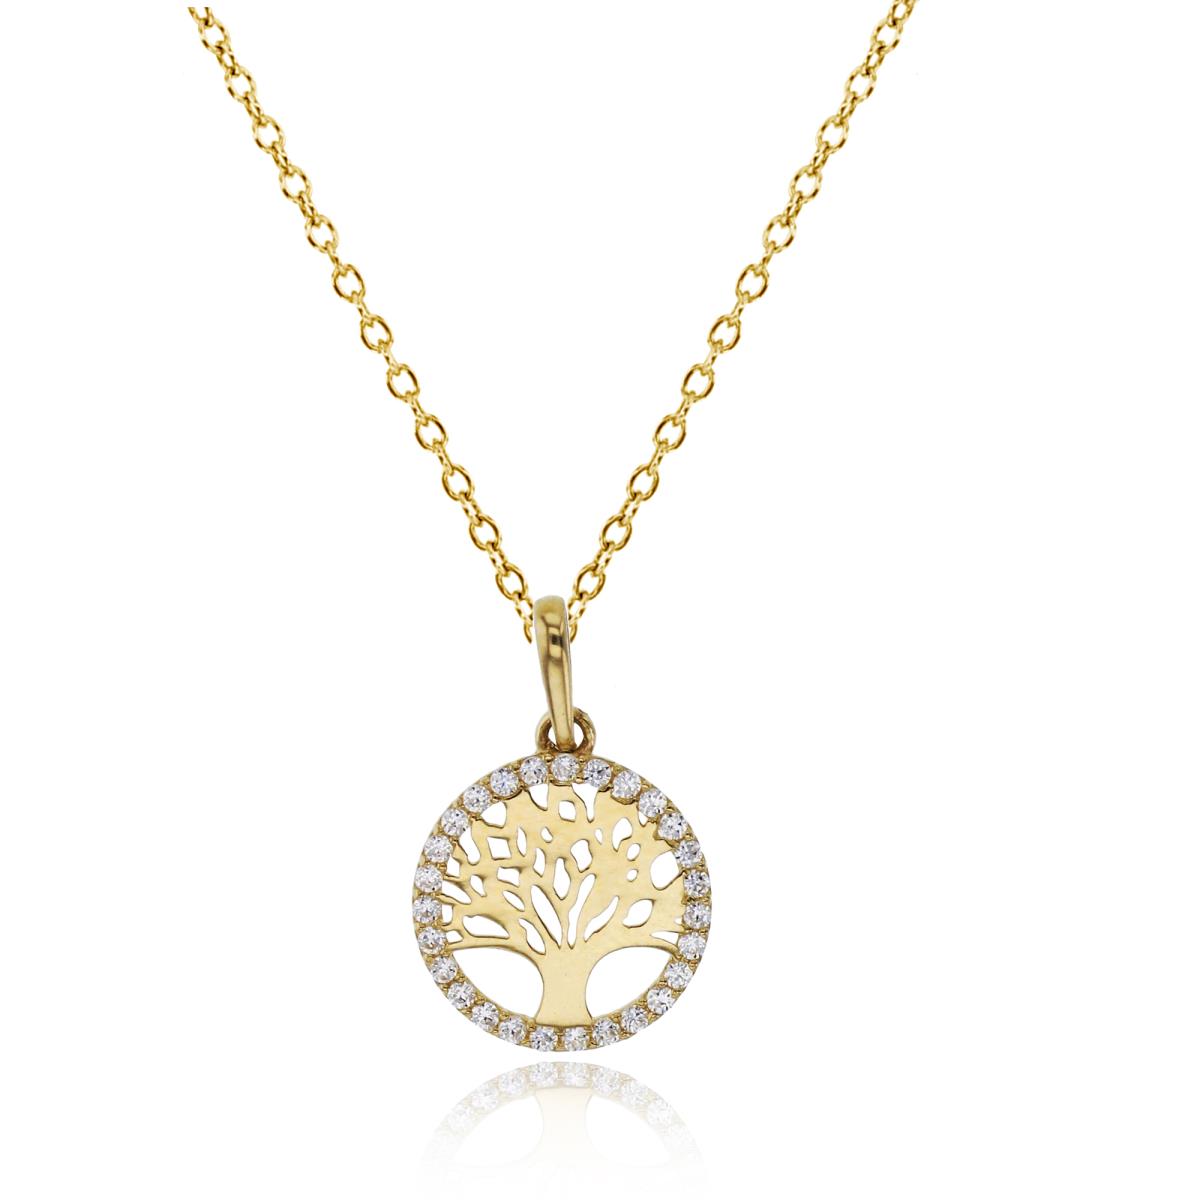 10K Yellow Gold 16x10mm Polished Tree Of Life Circle 18" Necklace